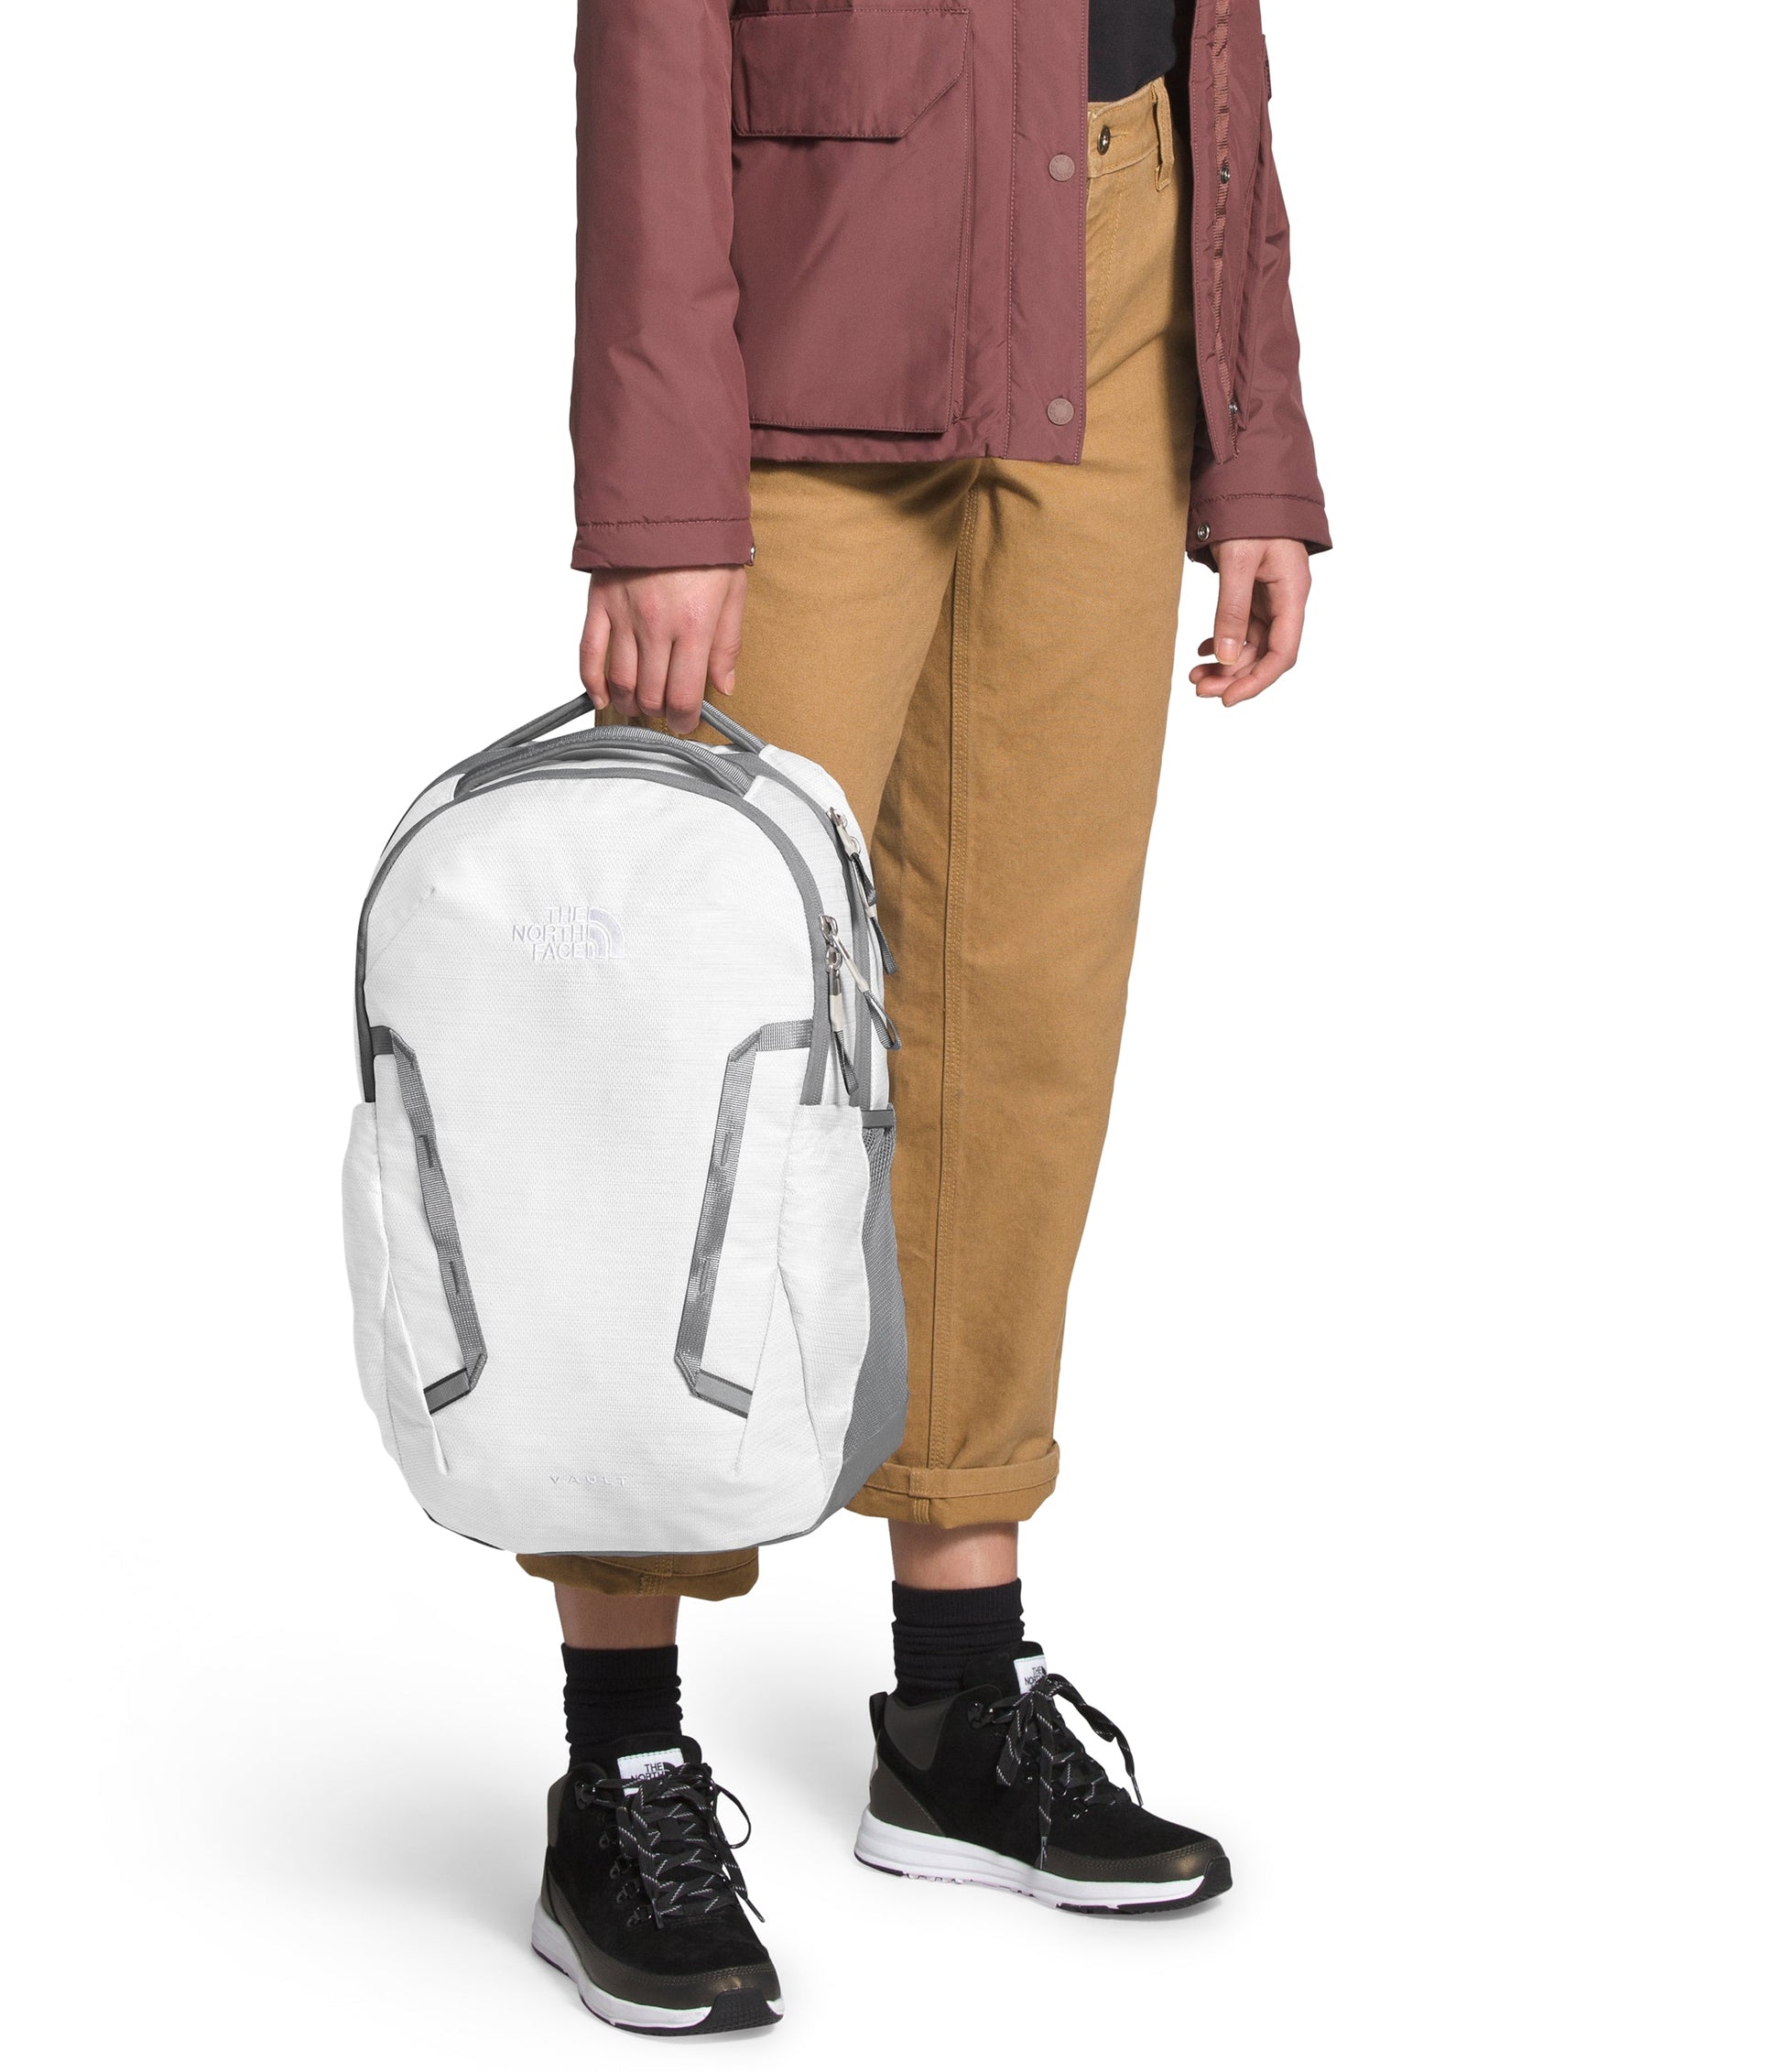 The North Face Women's Vault Backpack